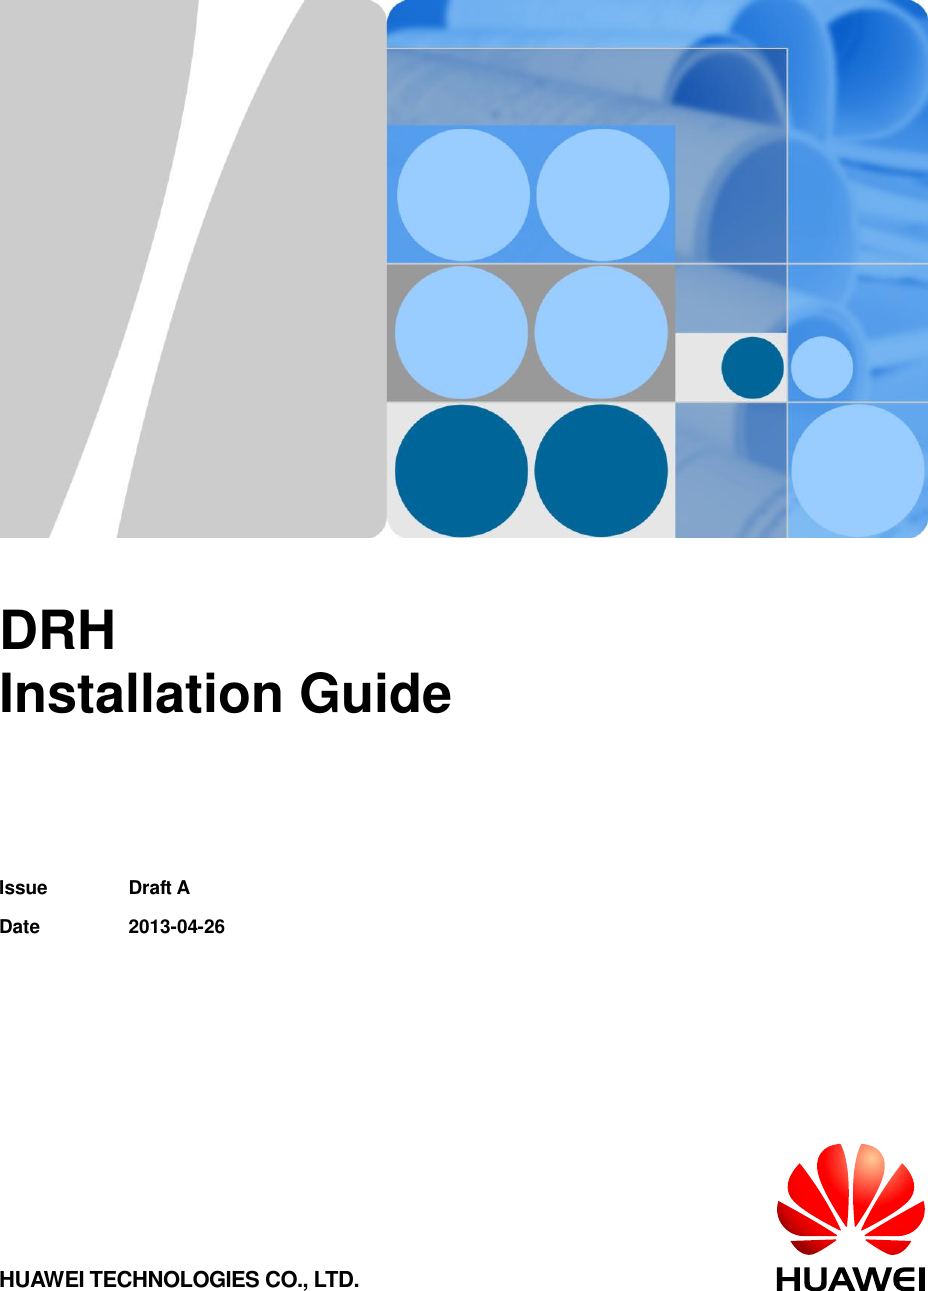          DRH Installation Guide    Issue Draft A Date 2013-04-26 HUAWEI TECHNOLOGIES CO., LTD. 